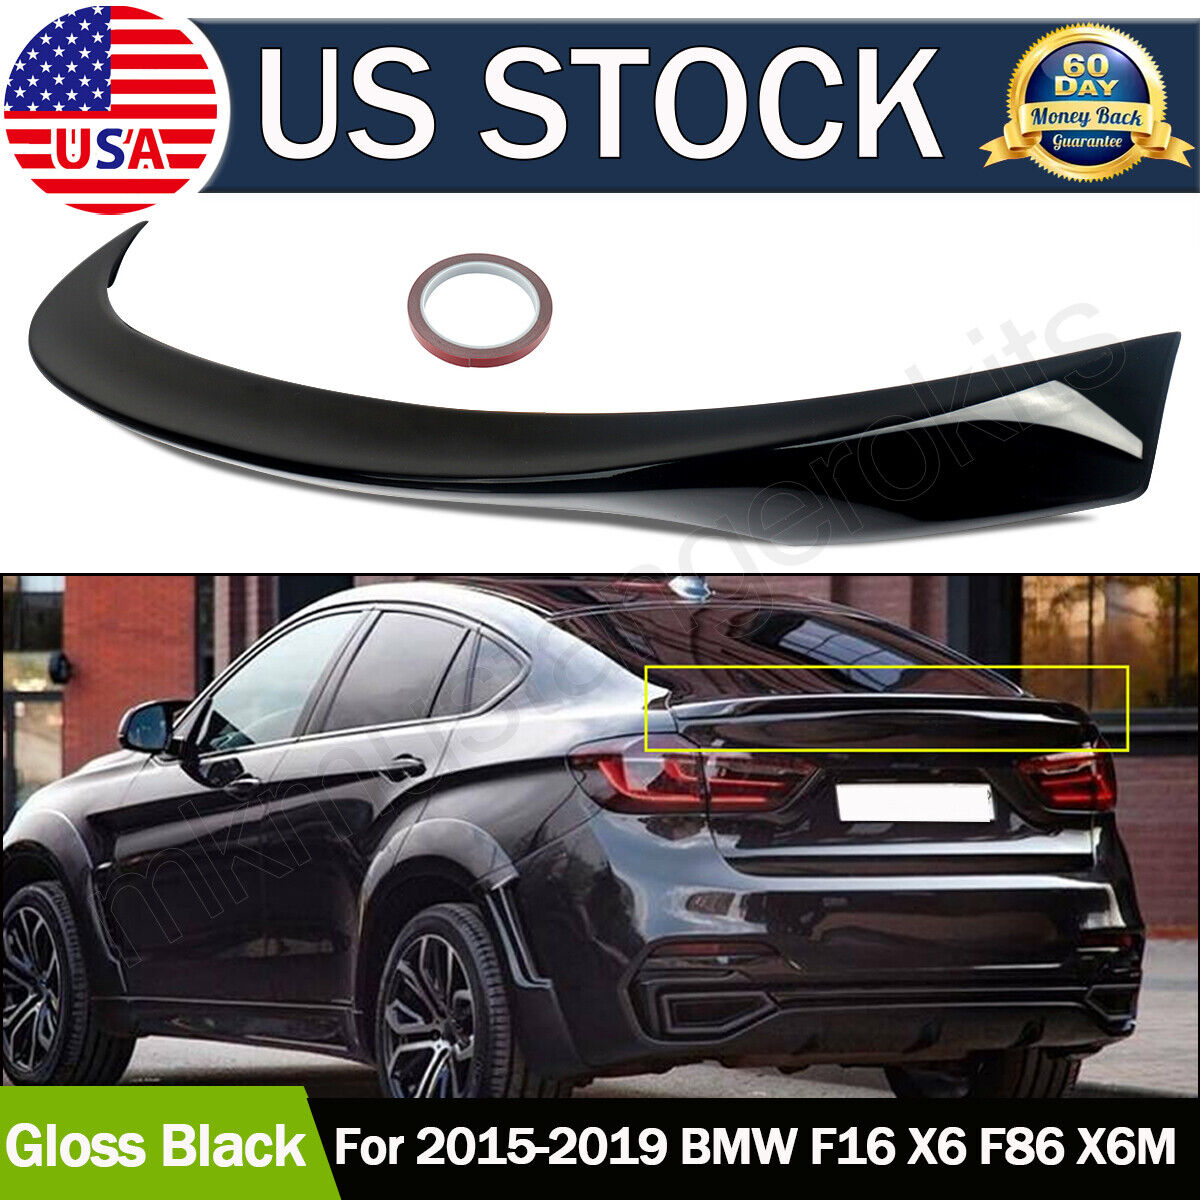 Painted Black Fits BMW X6 F16 X6M F86 Sport SUV P Style Trunk Spoiler 2015-2019